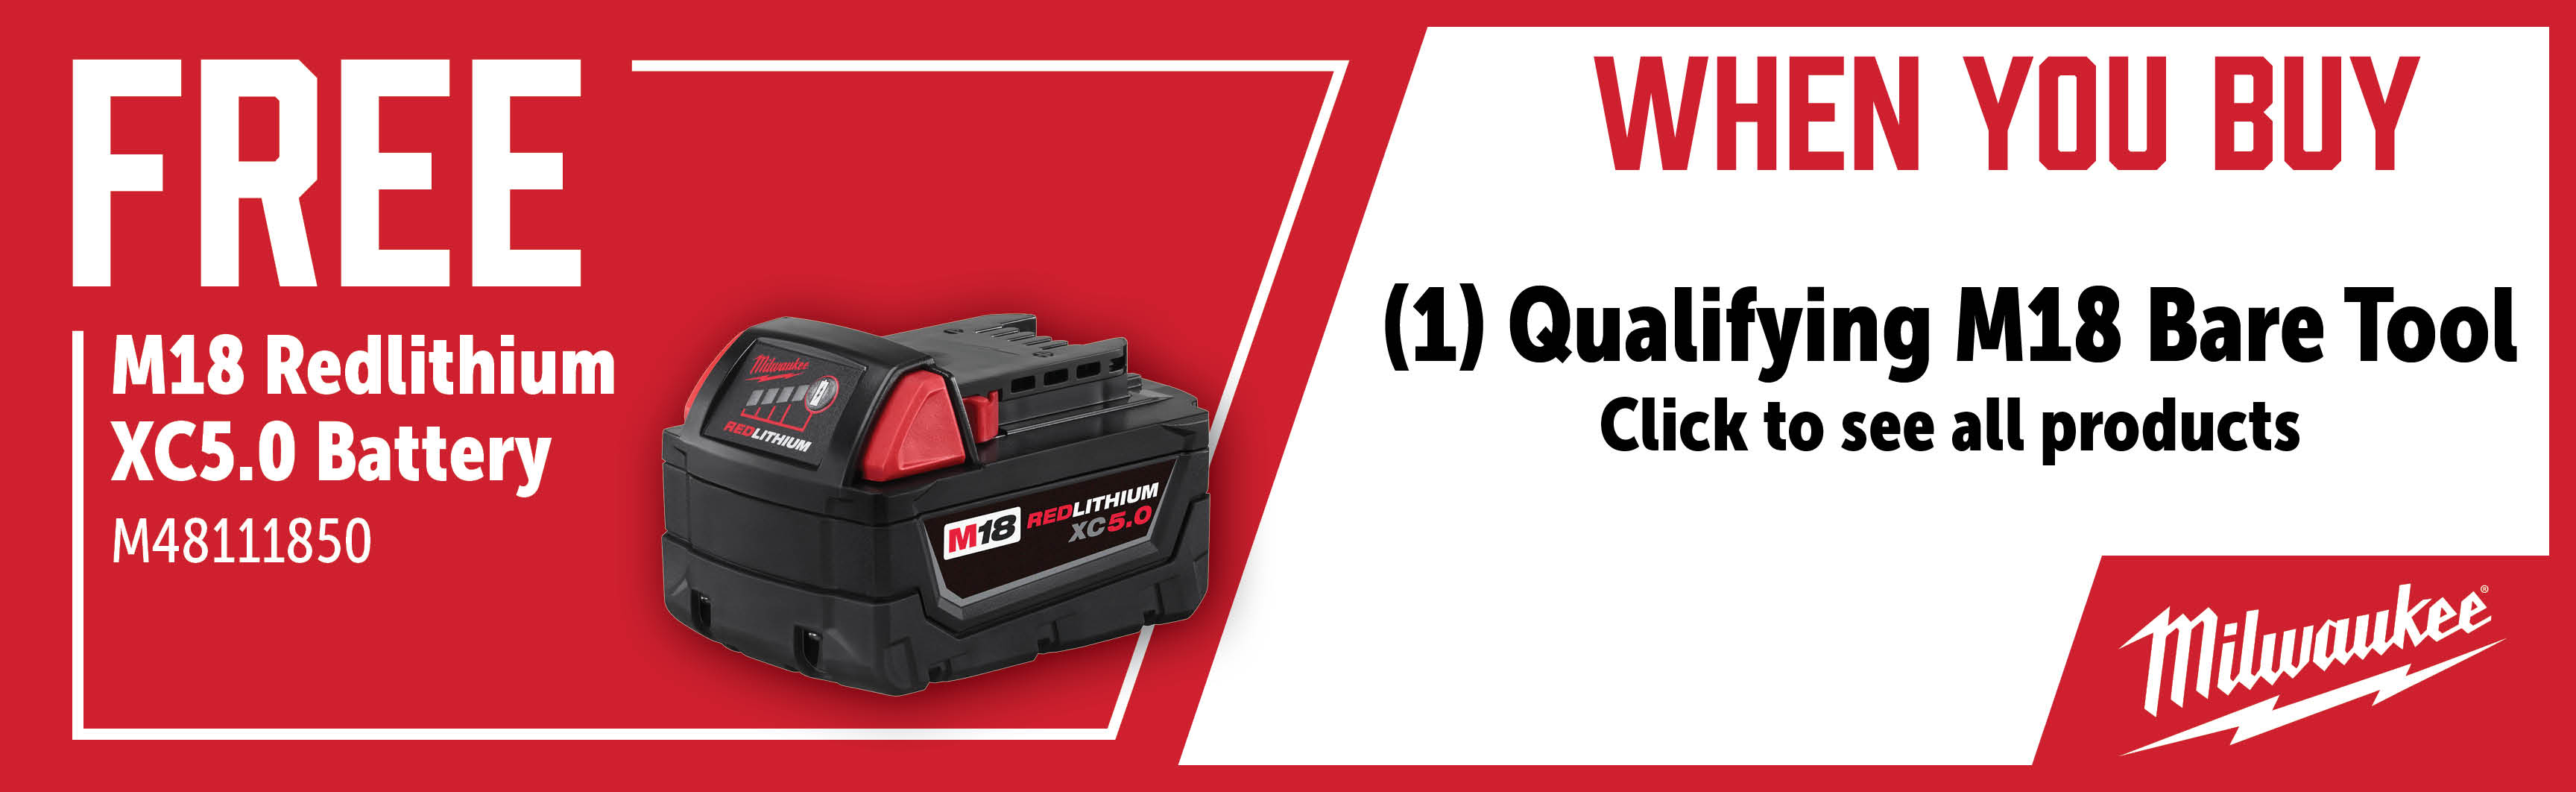 Milwaukee Aug-Oct: Buy a Qualifying M18 Bare Tool and Get a Free M48111850